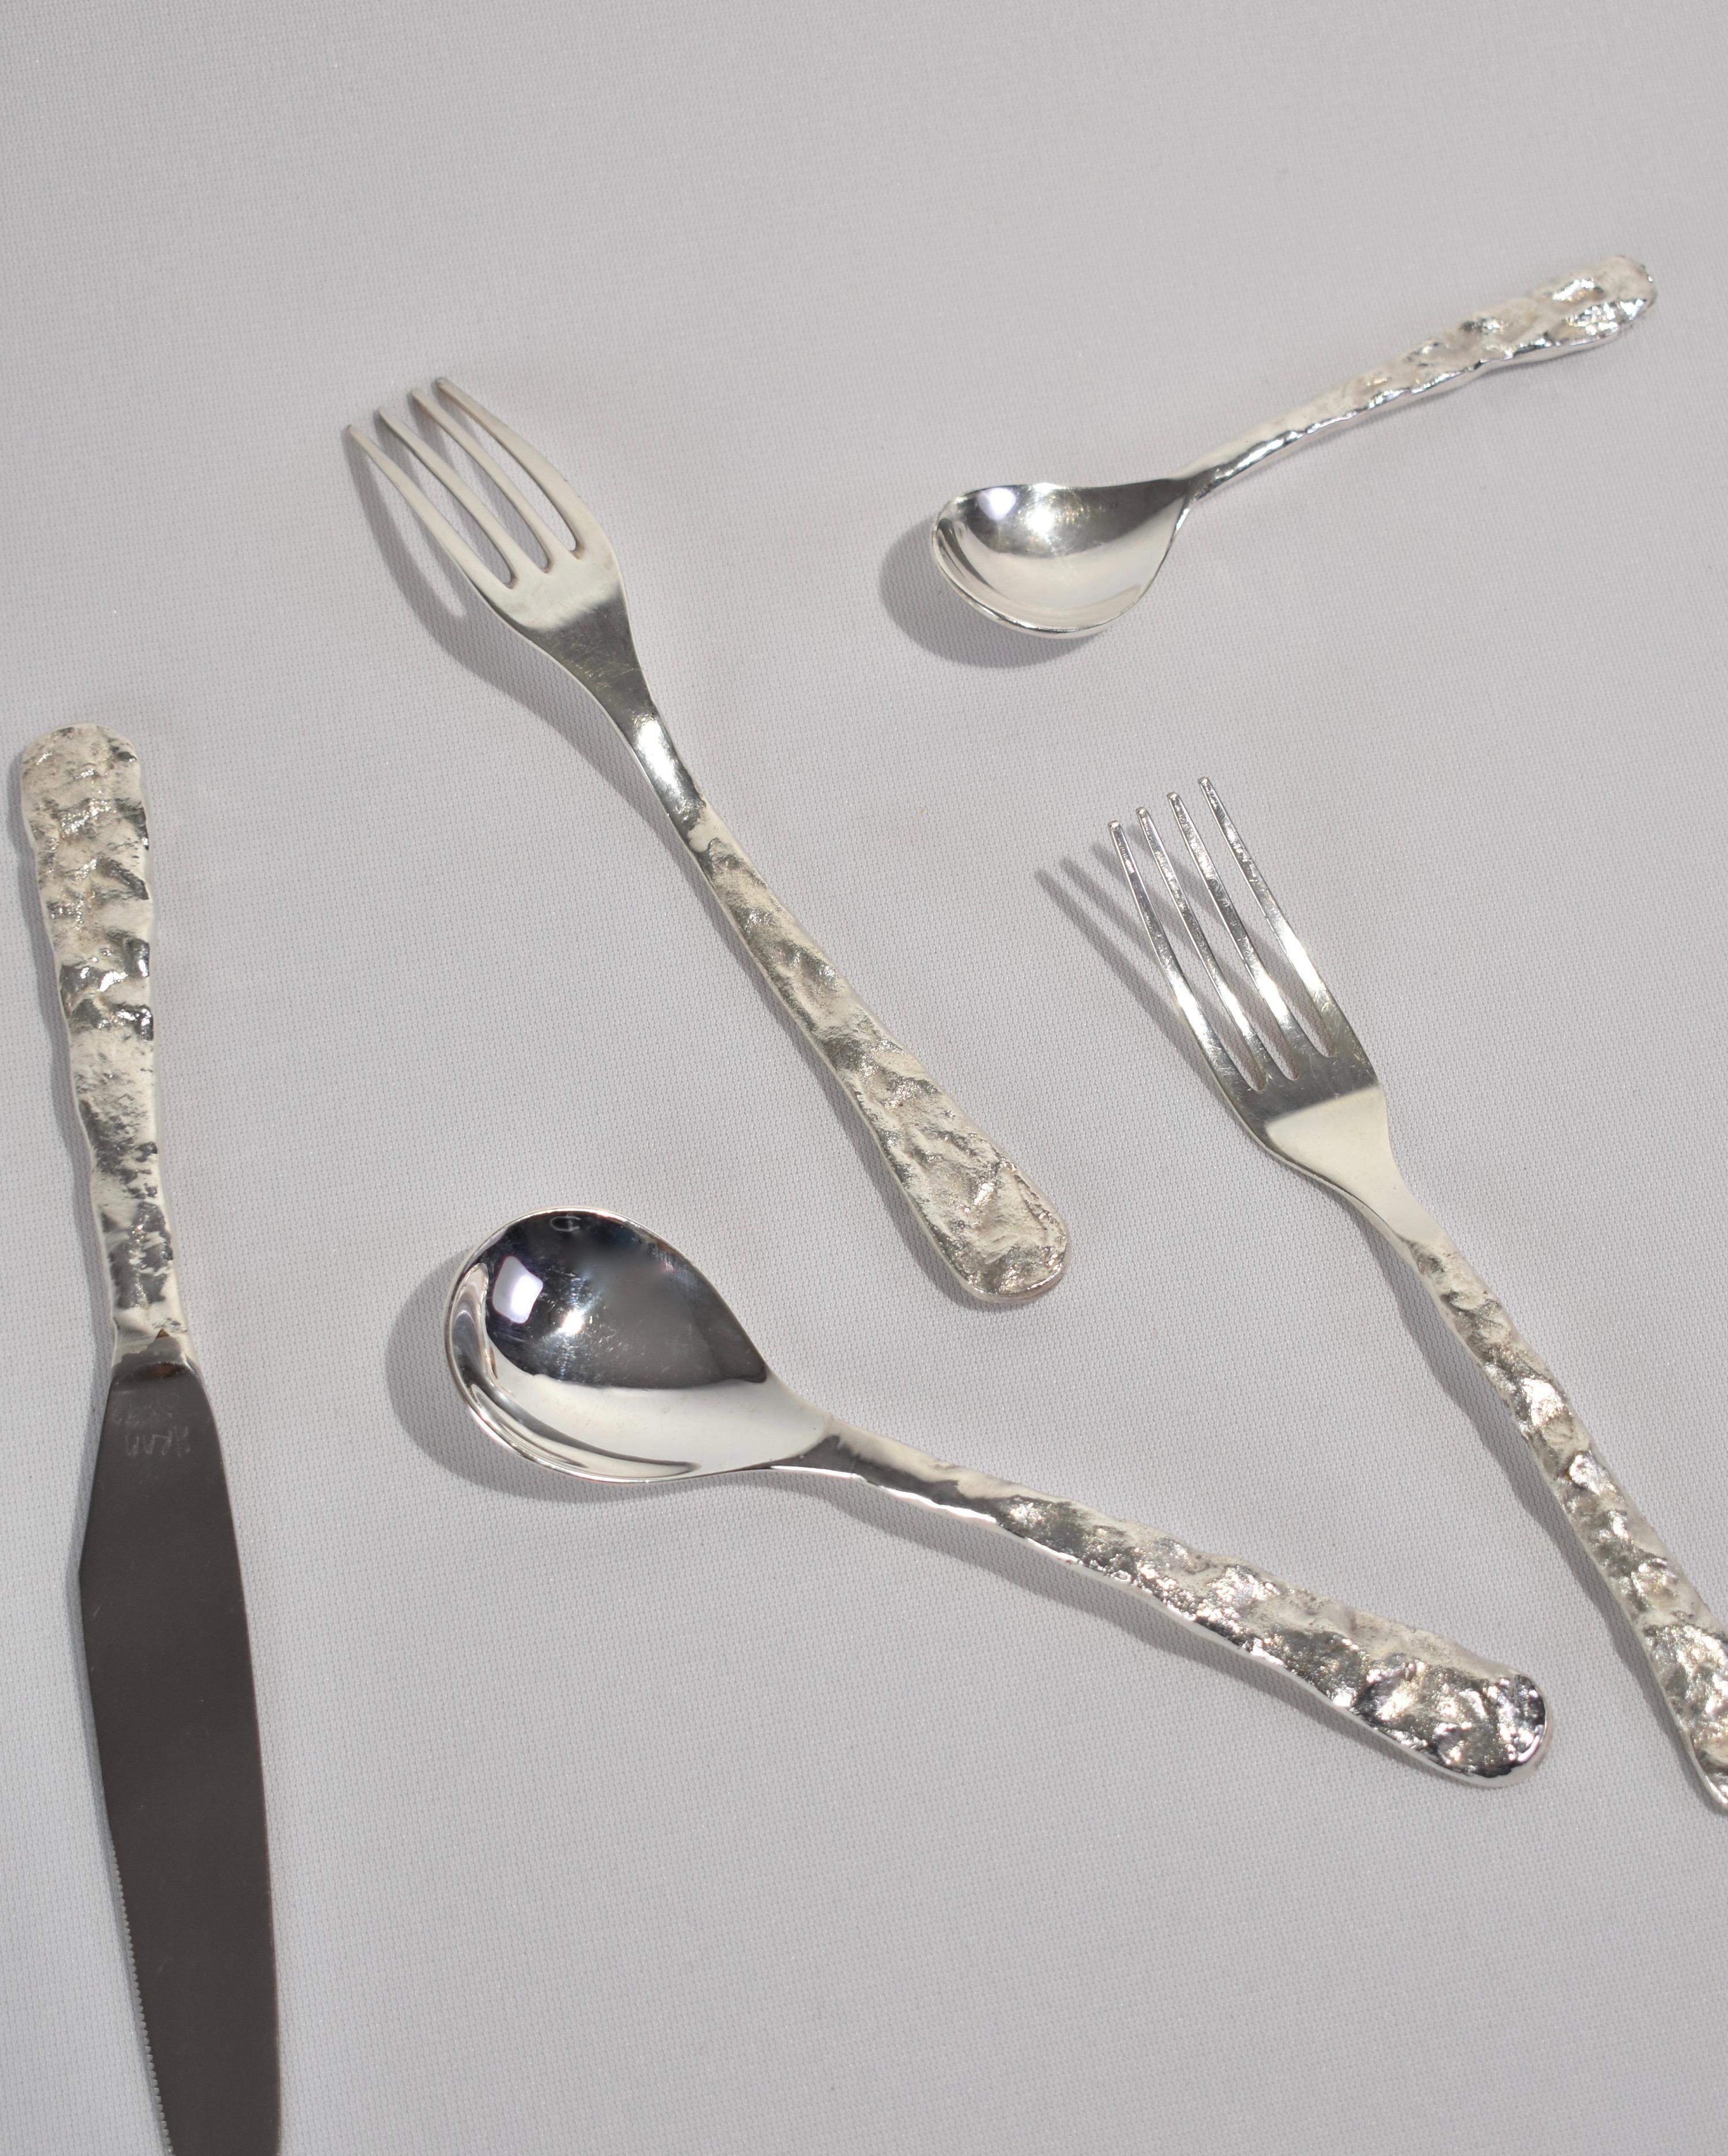 Vintage textured stainless steel flatware set of five pieces (one knife, two spoons, two forks) by Michael Aram. Each knife is signed Aram '92.